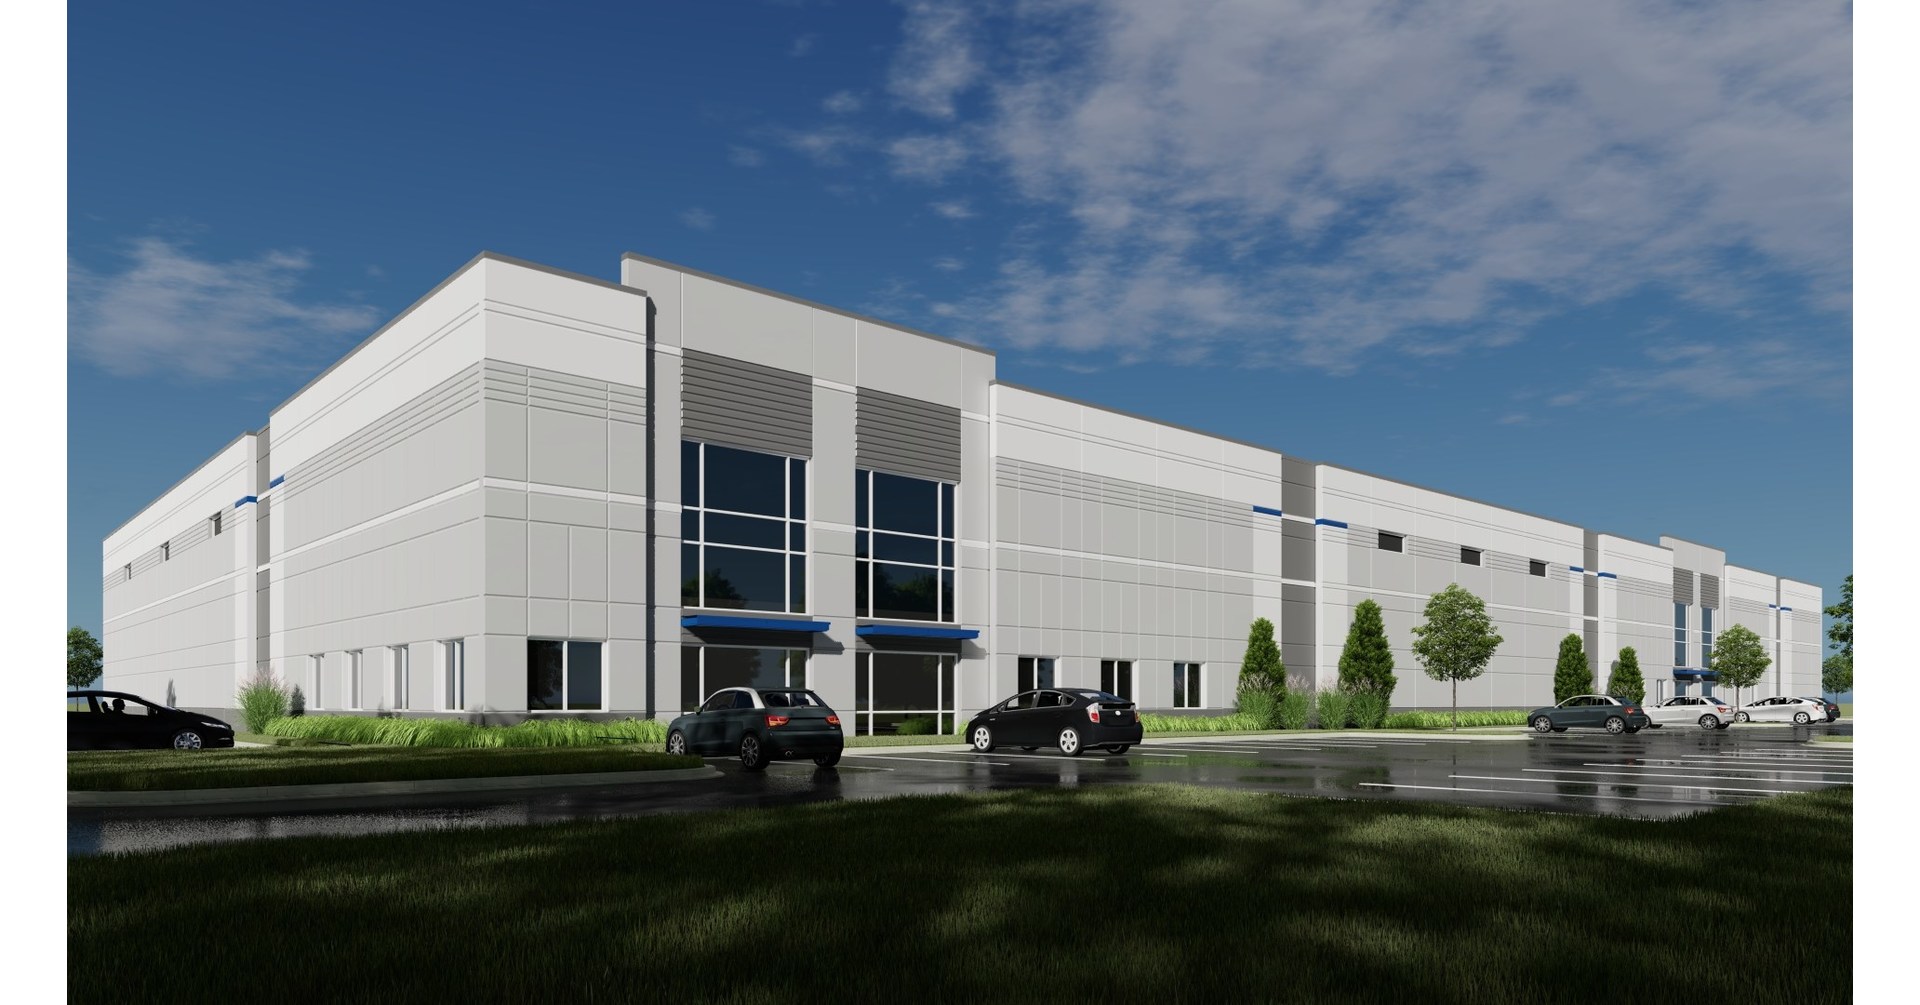  Seefried Properties Break Ground on New Distribution Facility in Mount Prospect, IL 